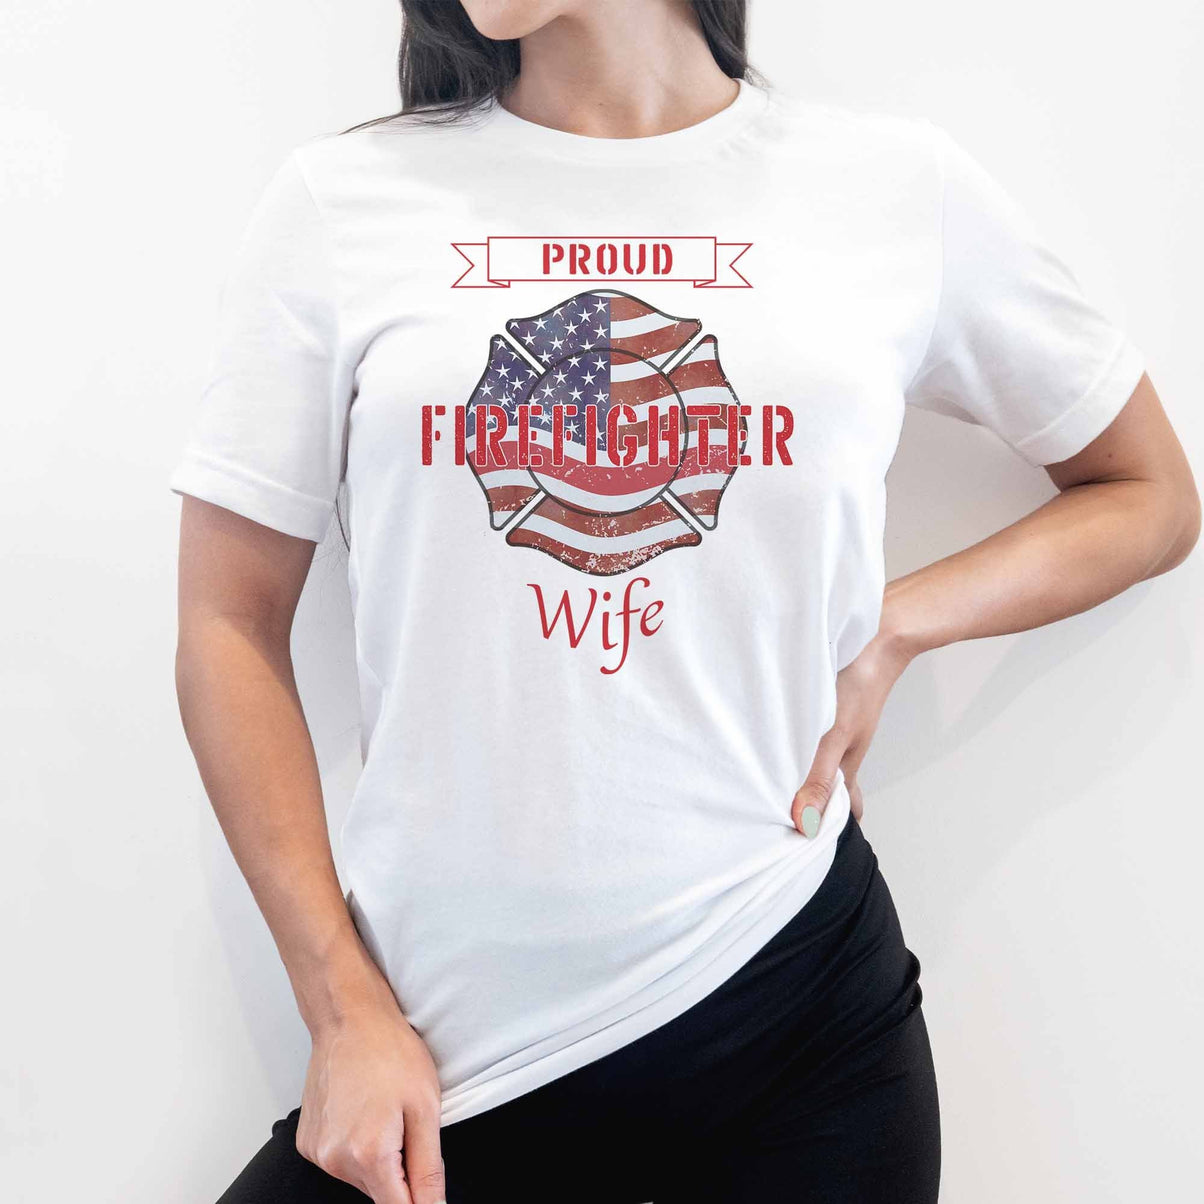 Proud Firefighter Wife - My Custom Tee Party